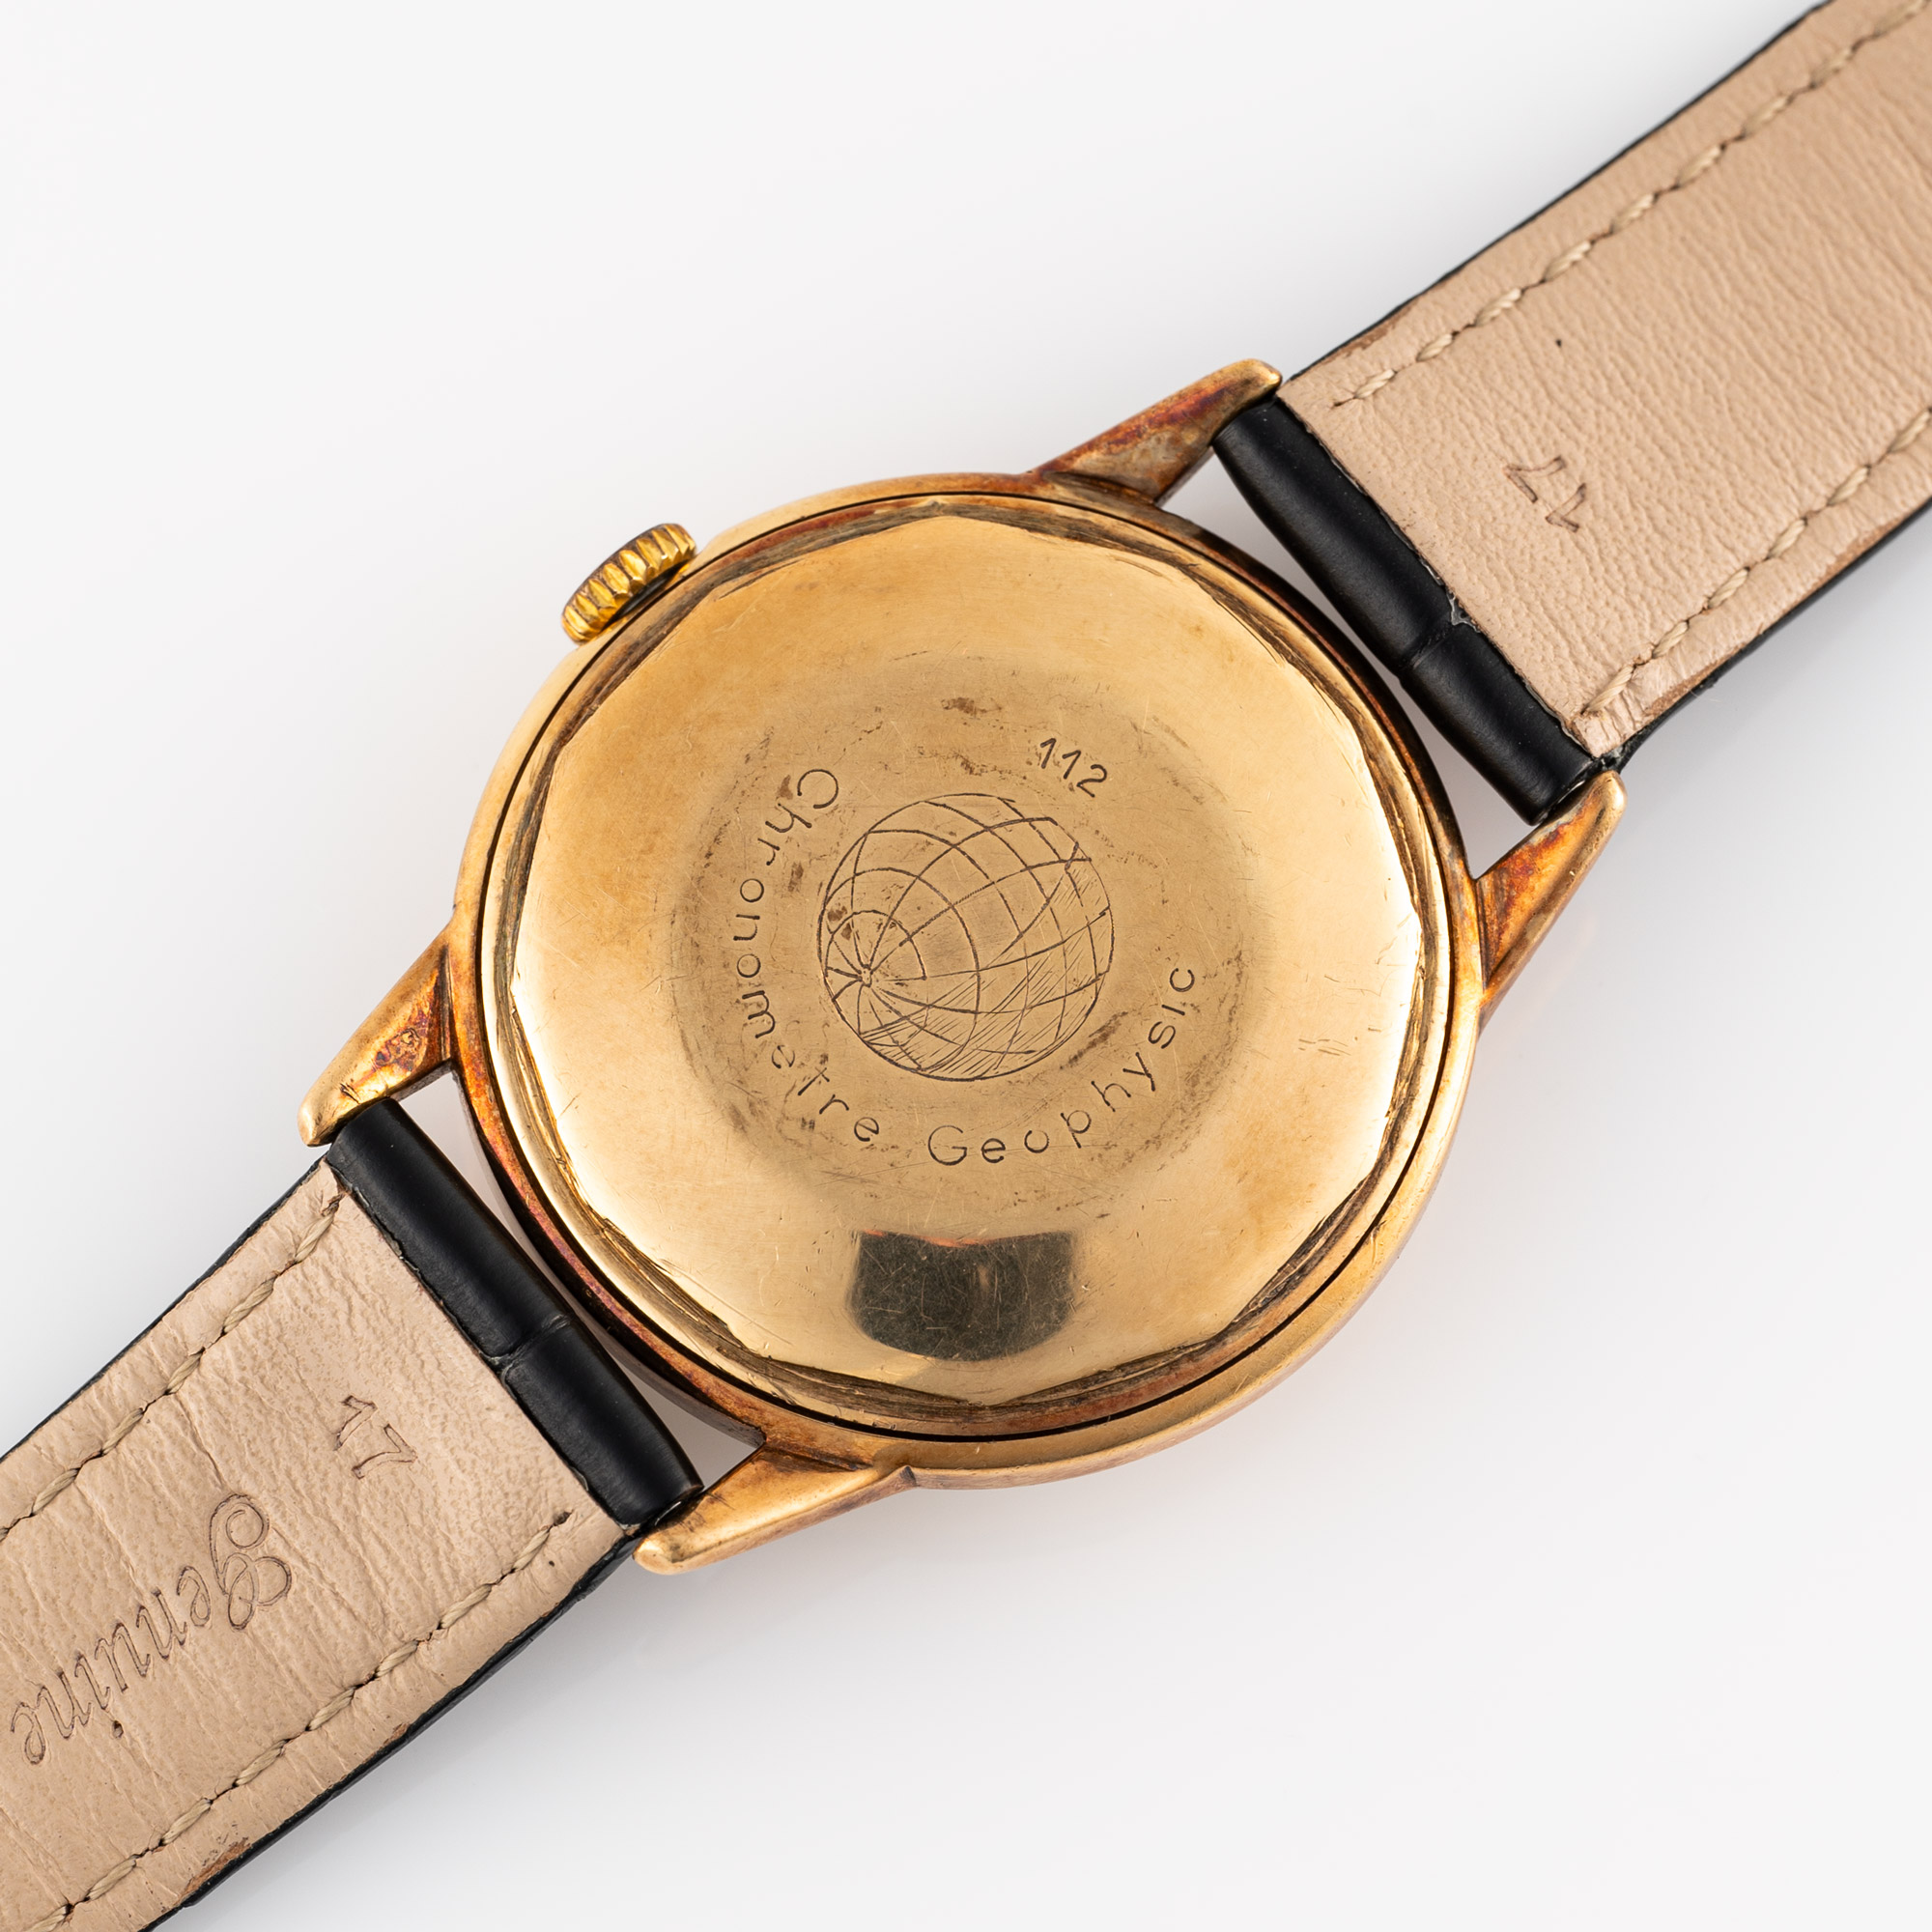 A RARE GENTLEMAN'S SIZE 9CT SOLID GOLD JAEGER LECOULTRE GEOPHYSIC CHRONOMETER WRIST WATCH CIRCA - Image 3 of 9